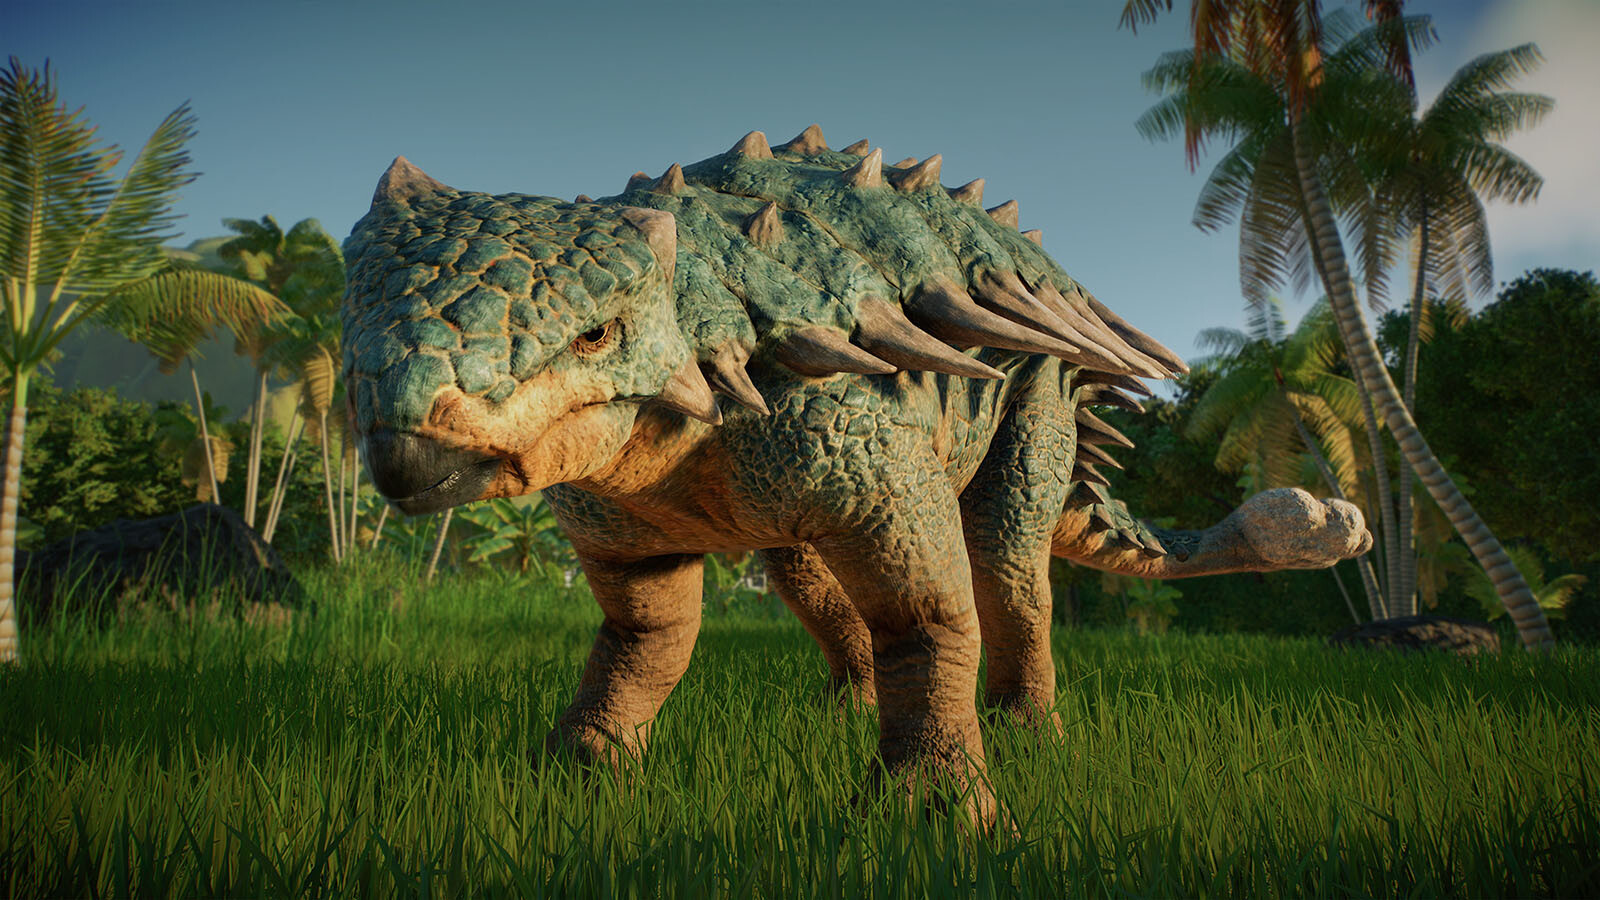 Camp Cretaceous Dinosaur Pack Now Available for Jurassic World Evolution 2  – Game Chronicles